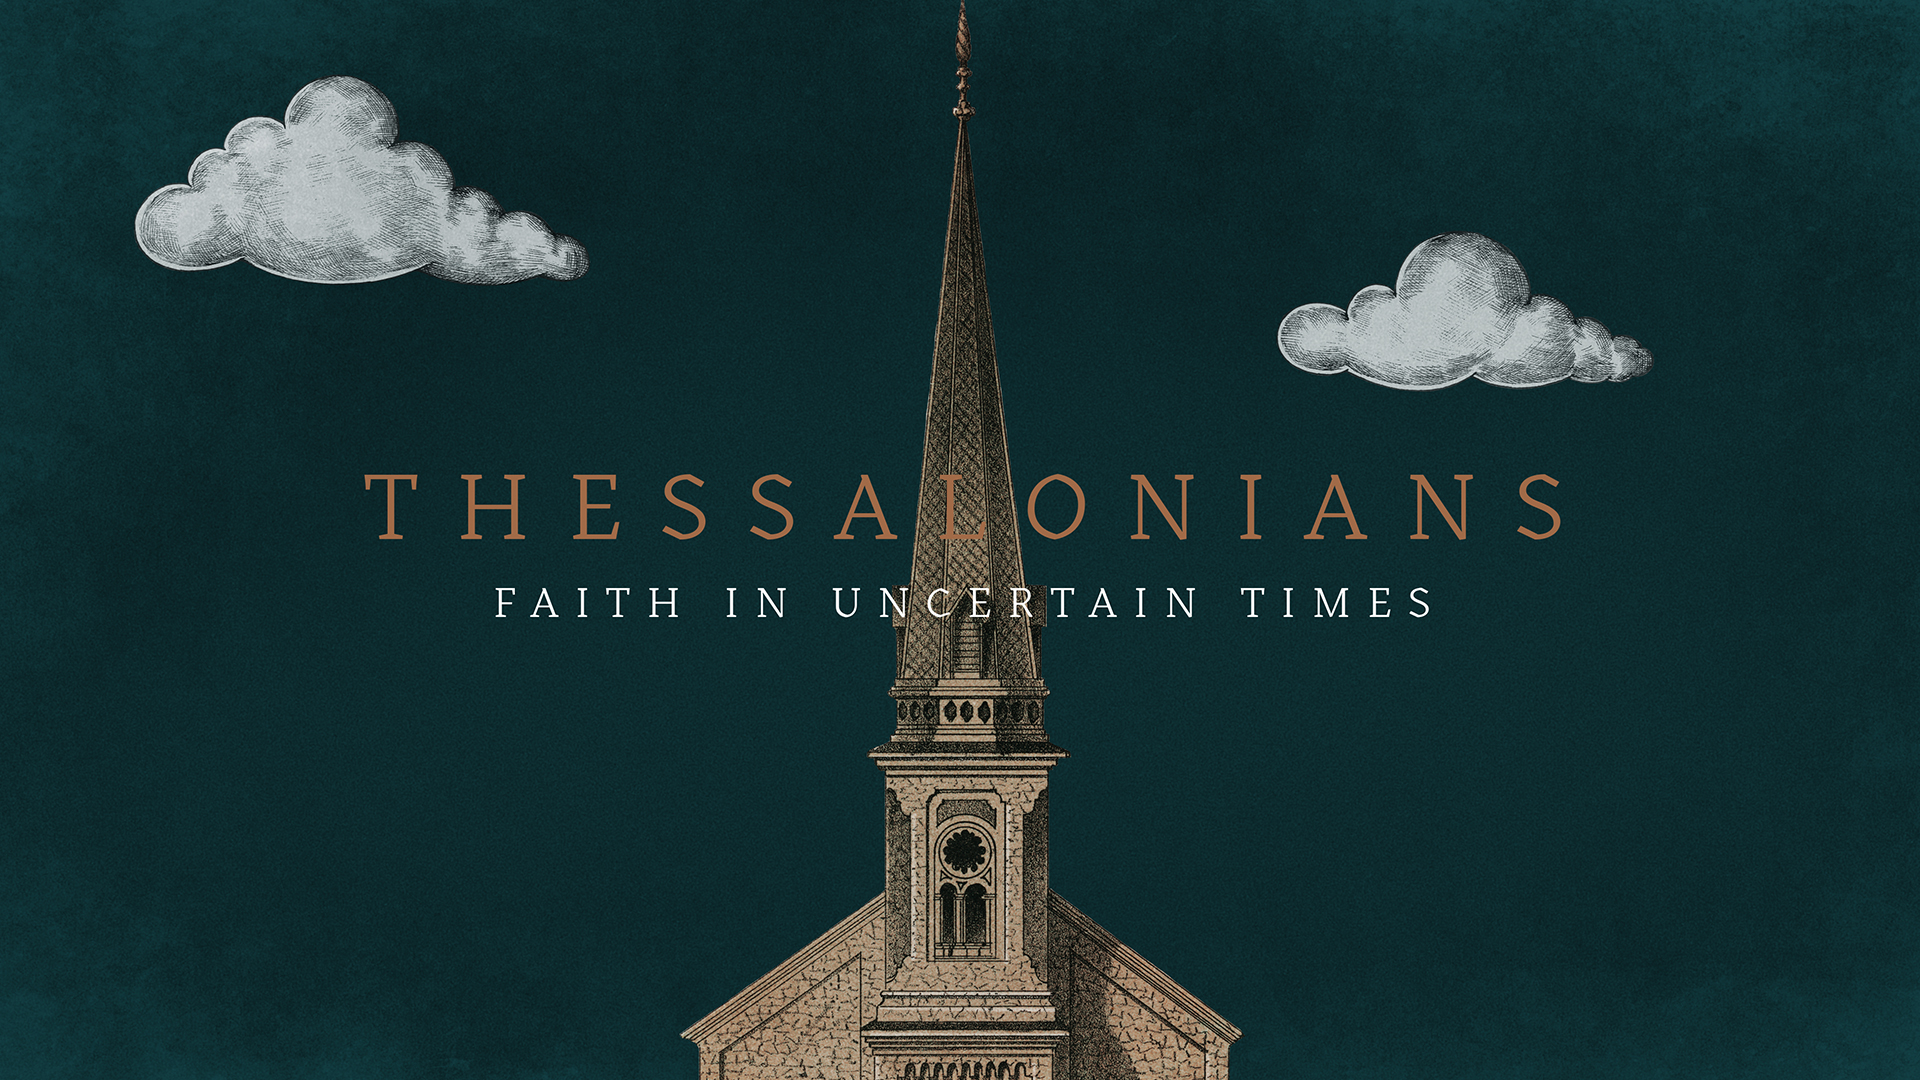 THESSALONIANS – FAITH IN UNCERTAIN TIMES: While We Wait